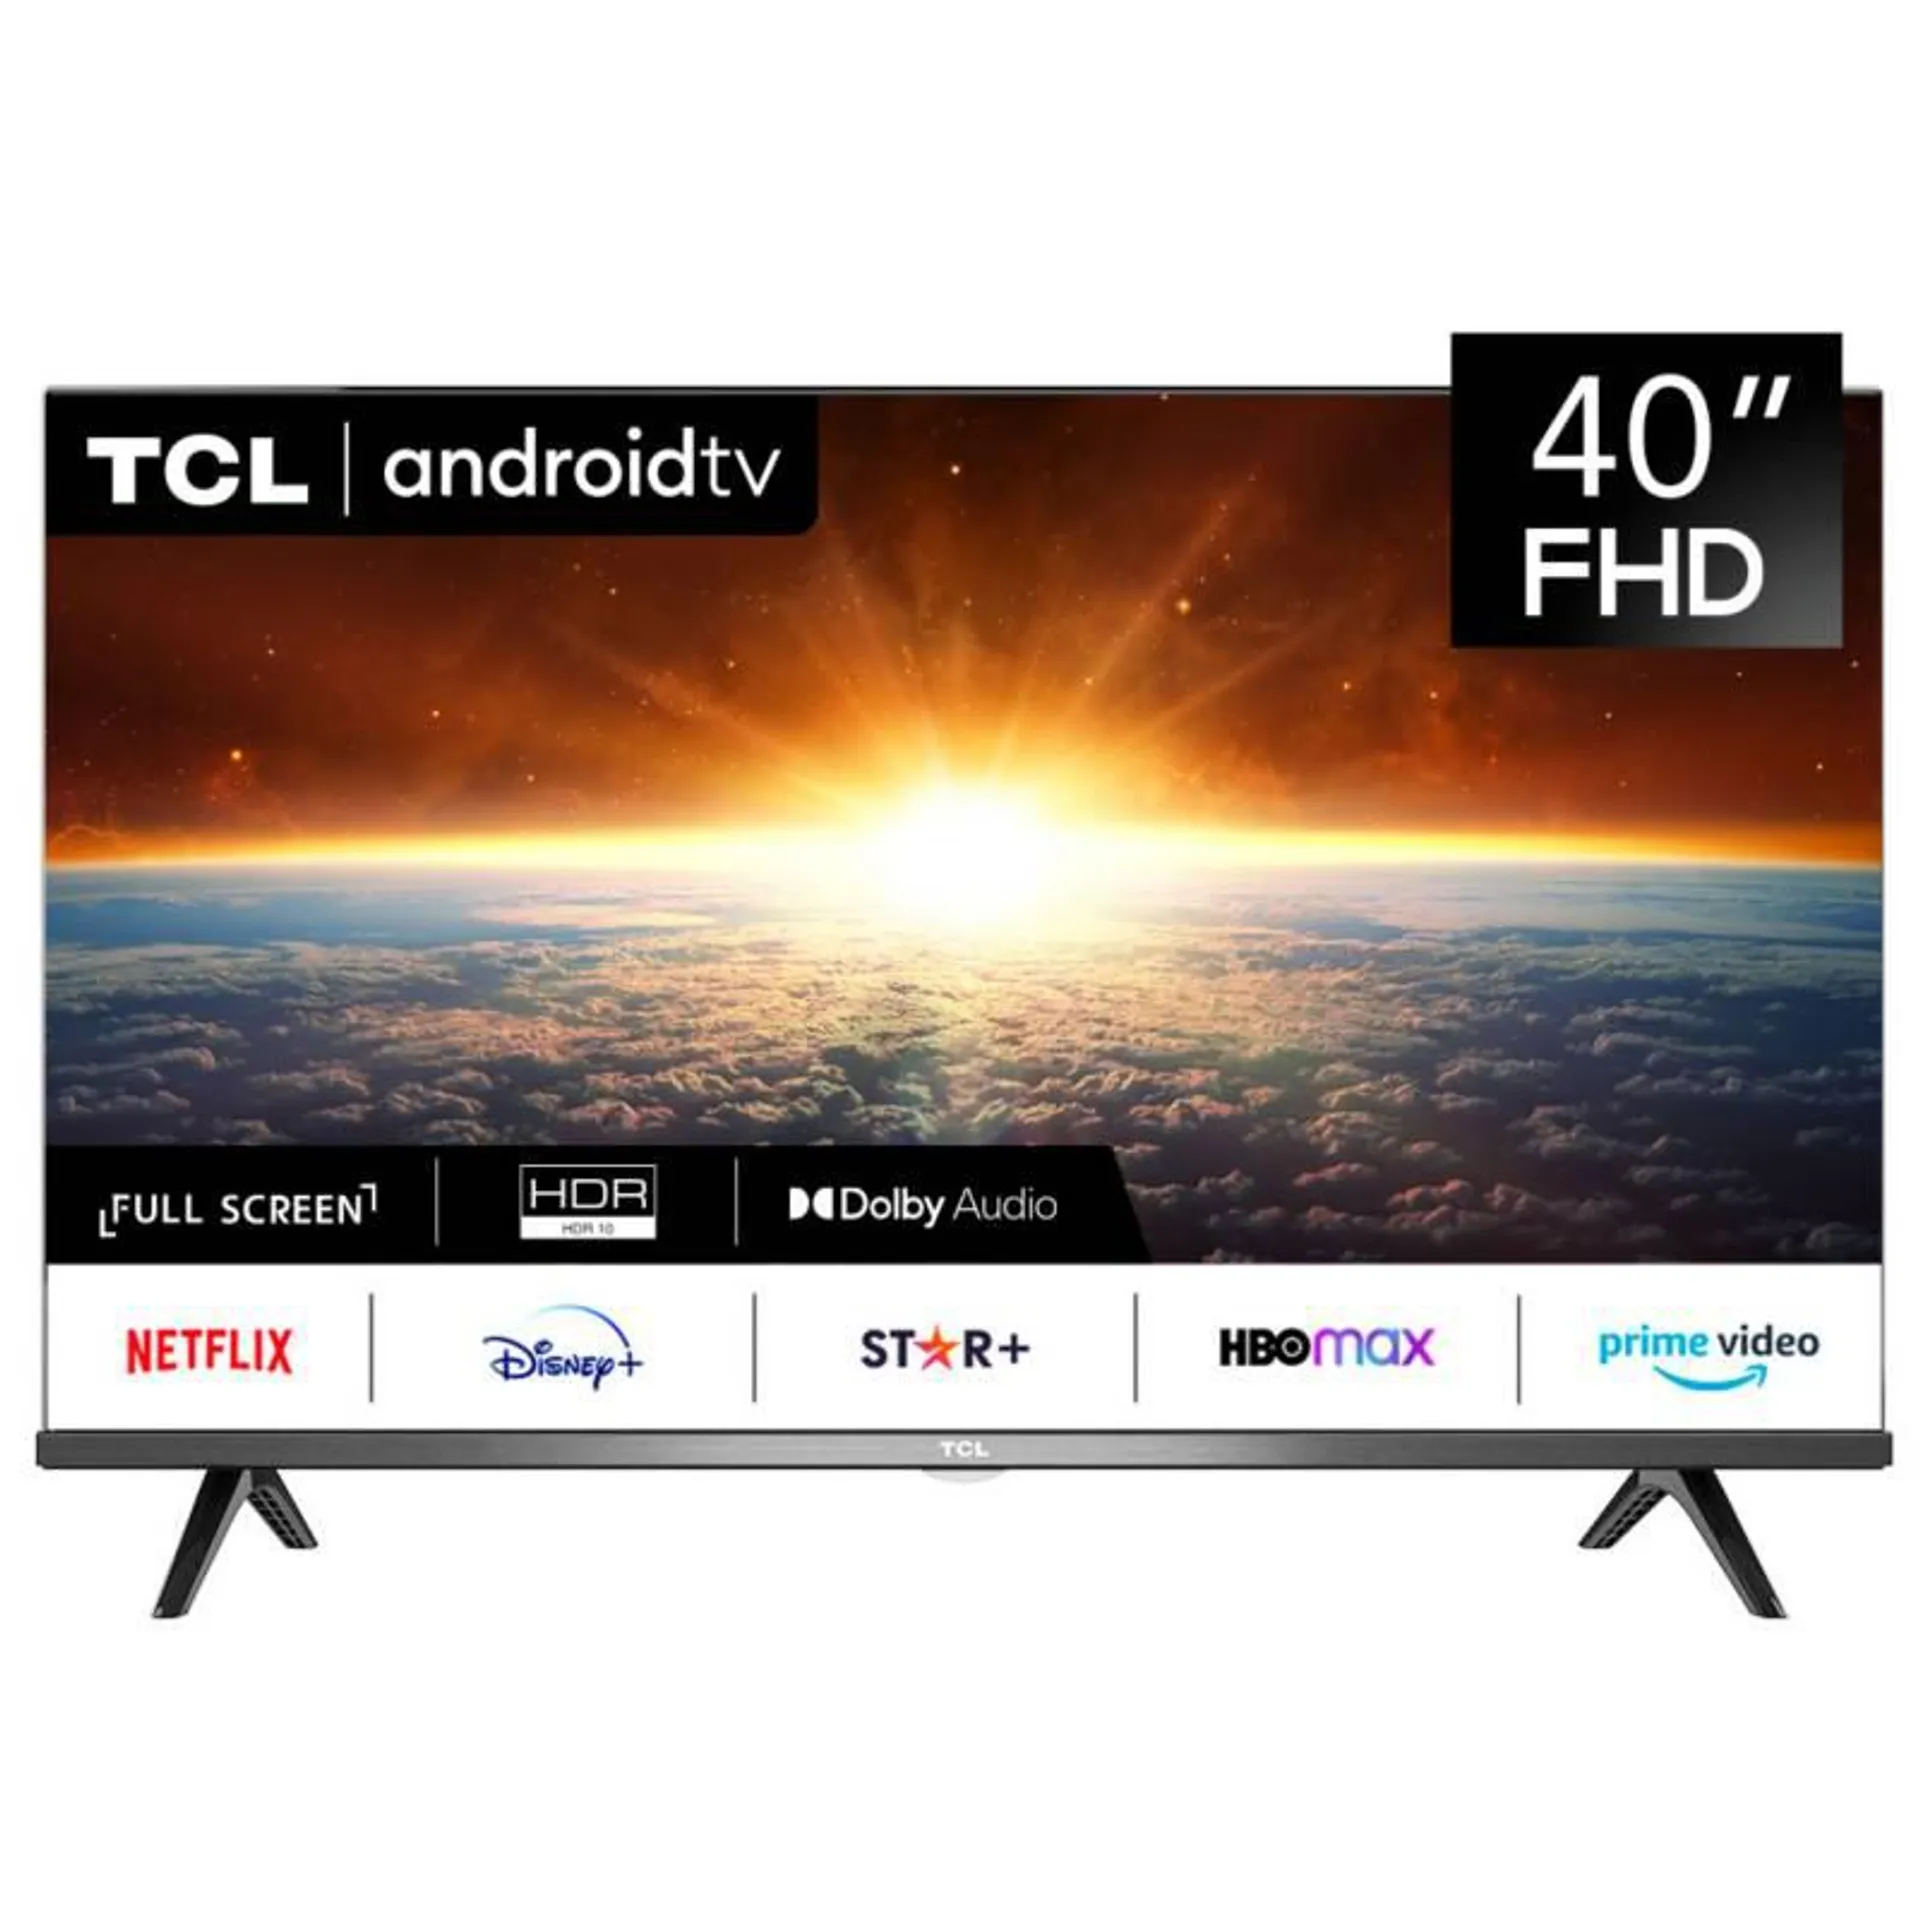 SMART TV 40 FHD ANDROID TCL-40S65 TCL